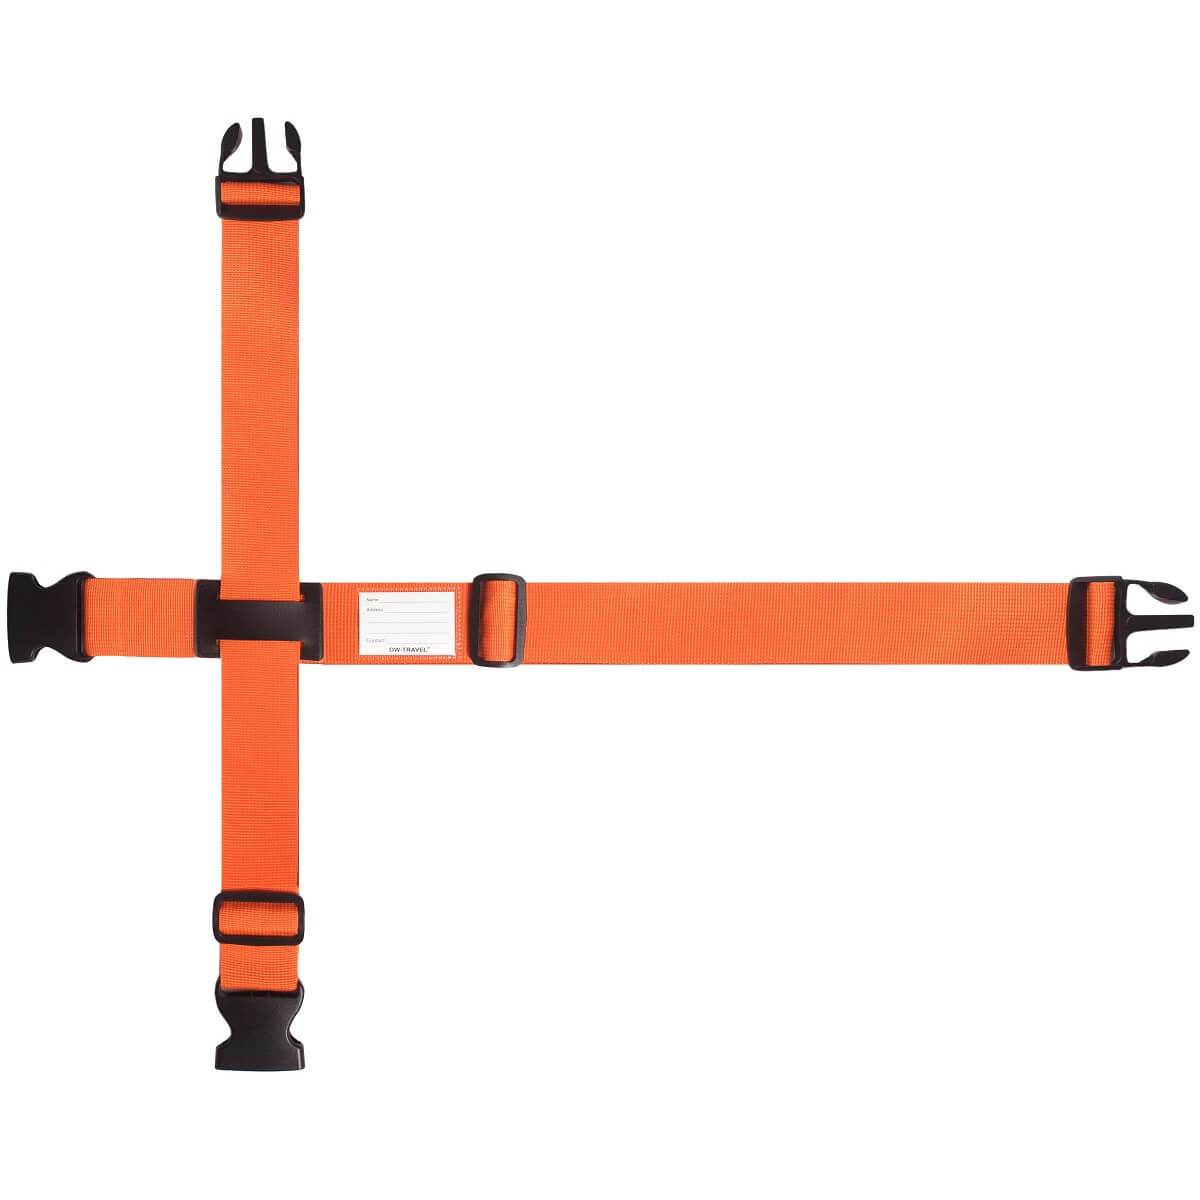 2 Pcs Luggage Suitcase Straps Set,travel Accessories Thickened Luggage Belt  With Quick Release Buckle,adjustable Orange Travel Luggage Straps For Suit